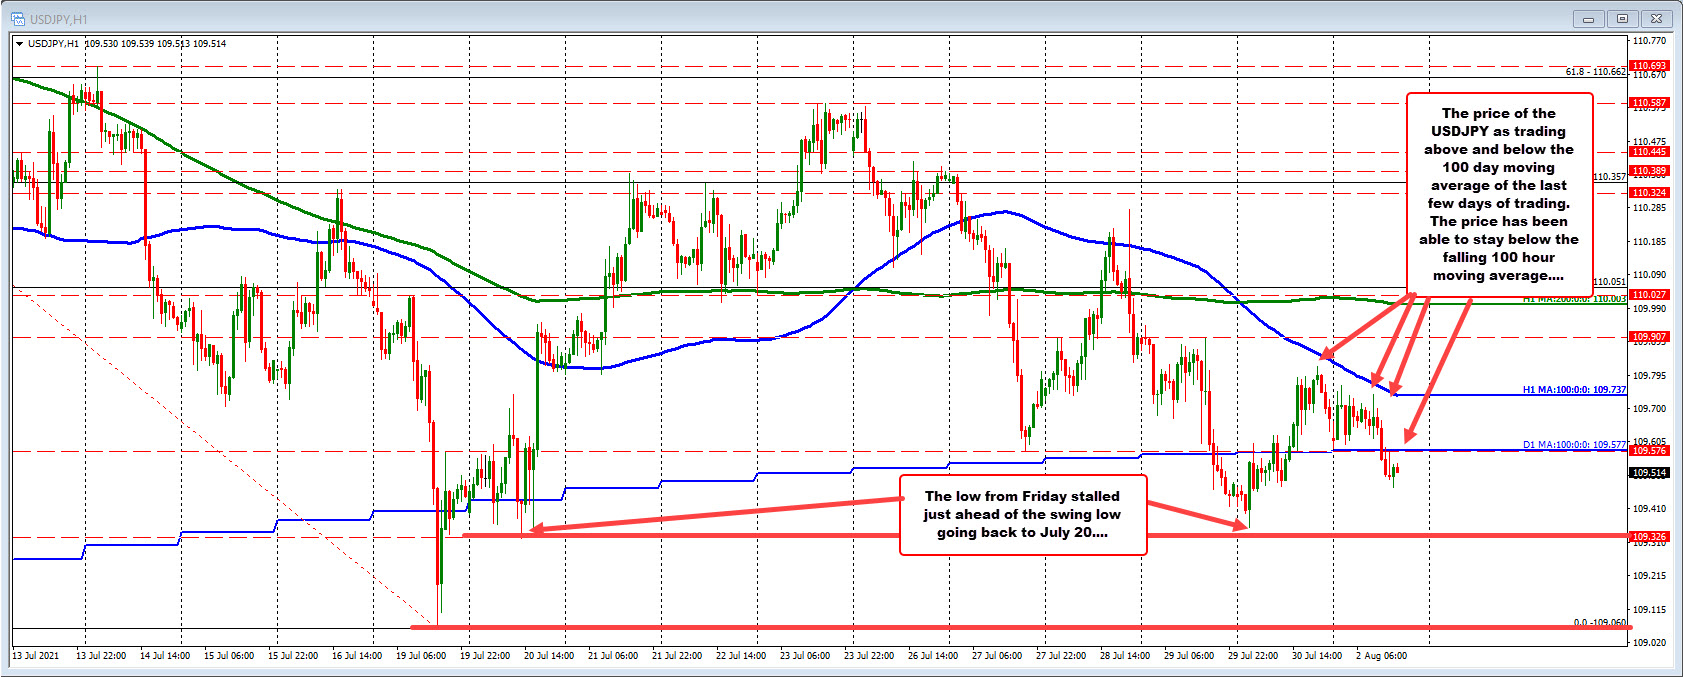 USDJPY staying below the 100 day MA over the last 3 hours of trading